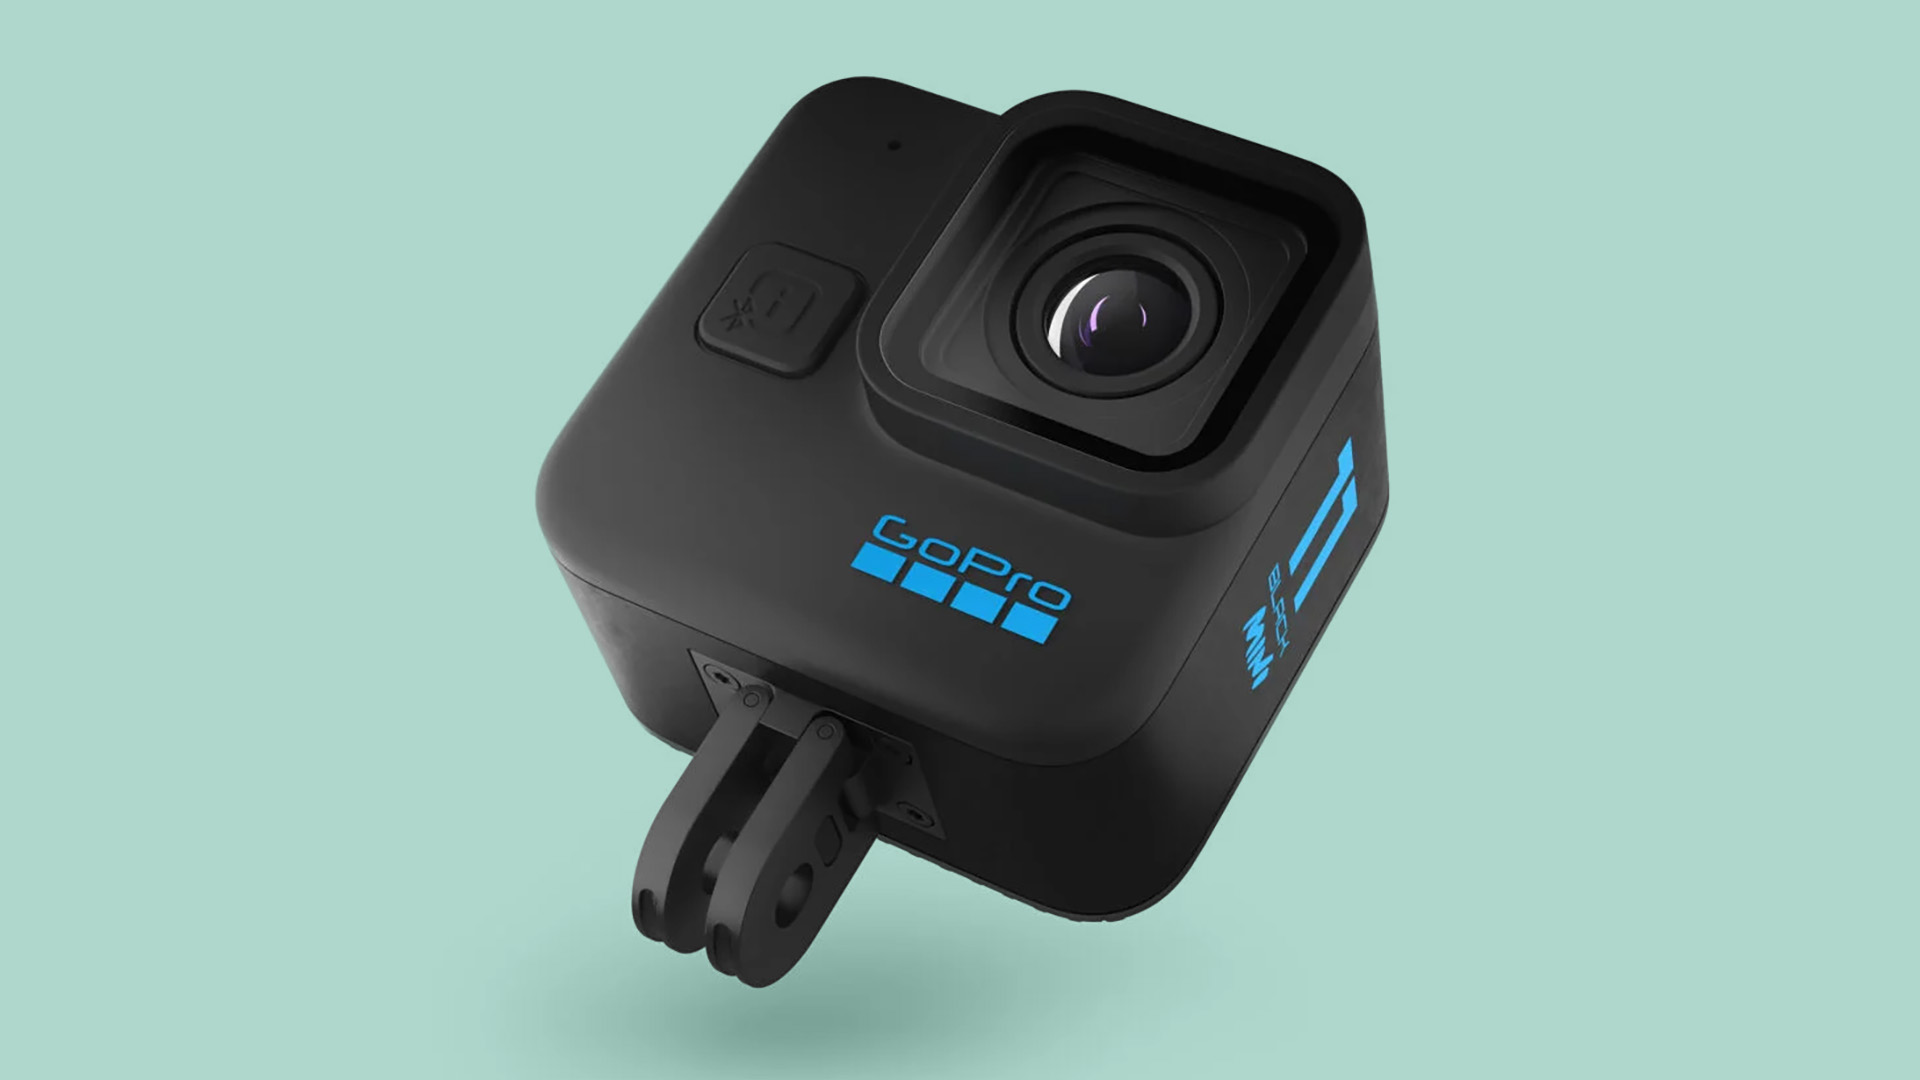 GoPro Hero 11 Black Mini: Hands-on Explained and Detailed! 